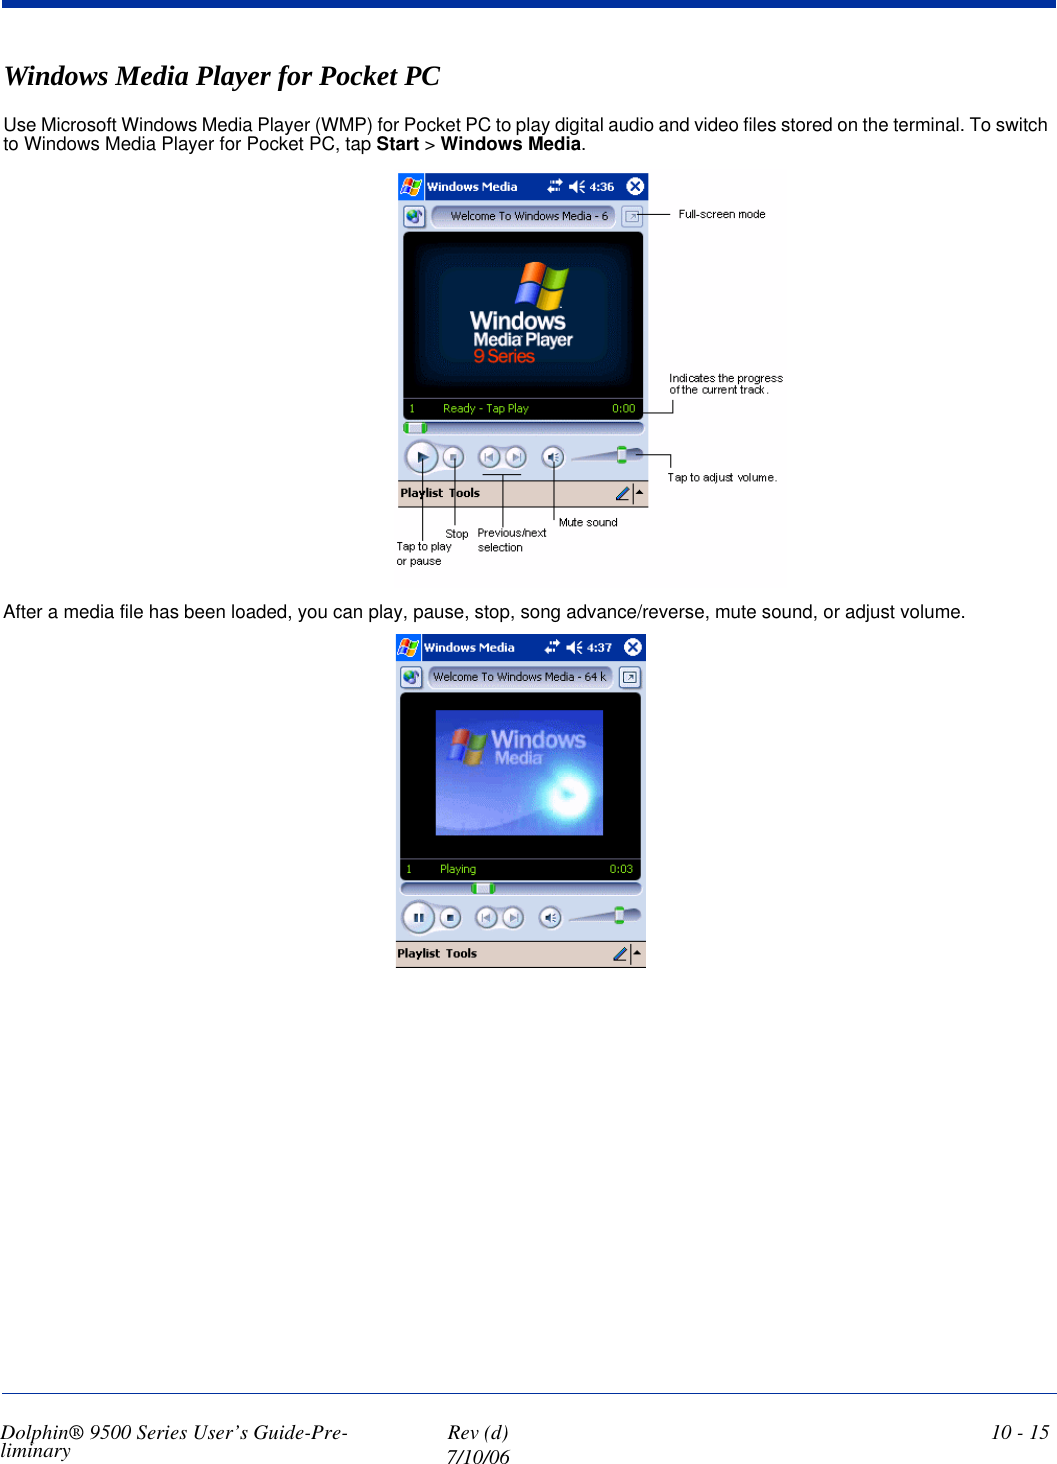 Dolphin® 9500 Series User’s Guide-Pre-liminary  Rev (d)7/10/0610 - 15Windows Media Player for Pocket PCUse Microsoft Windows Media Player (WMP) for Pocket PC to play digital audio and video files stored on the terminal. To switch to Windows Media Player for Pocket PC, tap Start &gt; Windows Media.After a media file has been loaded, you can play, pause, stop, song advance/reverse, mute sound, or adjust volume. 